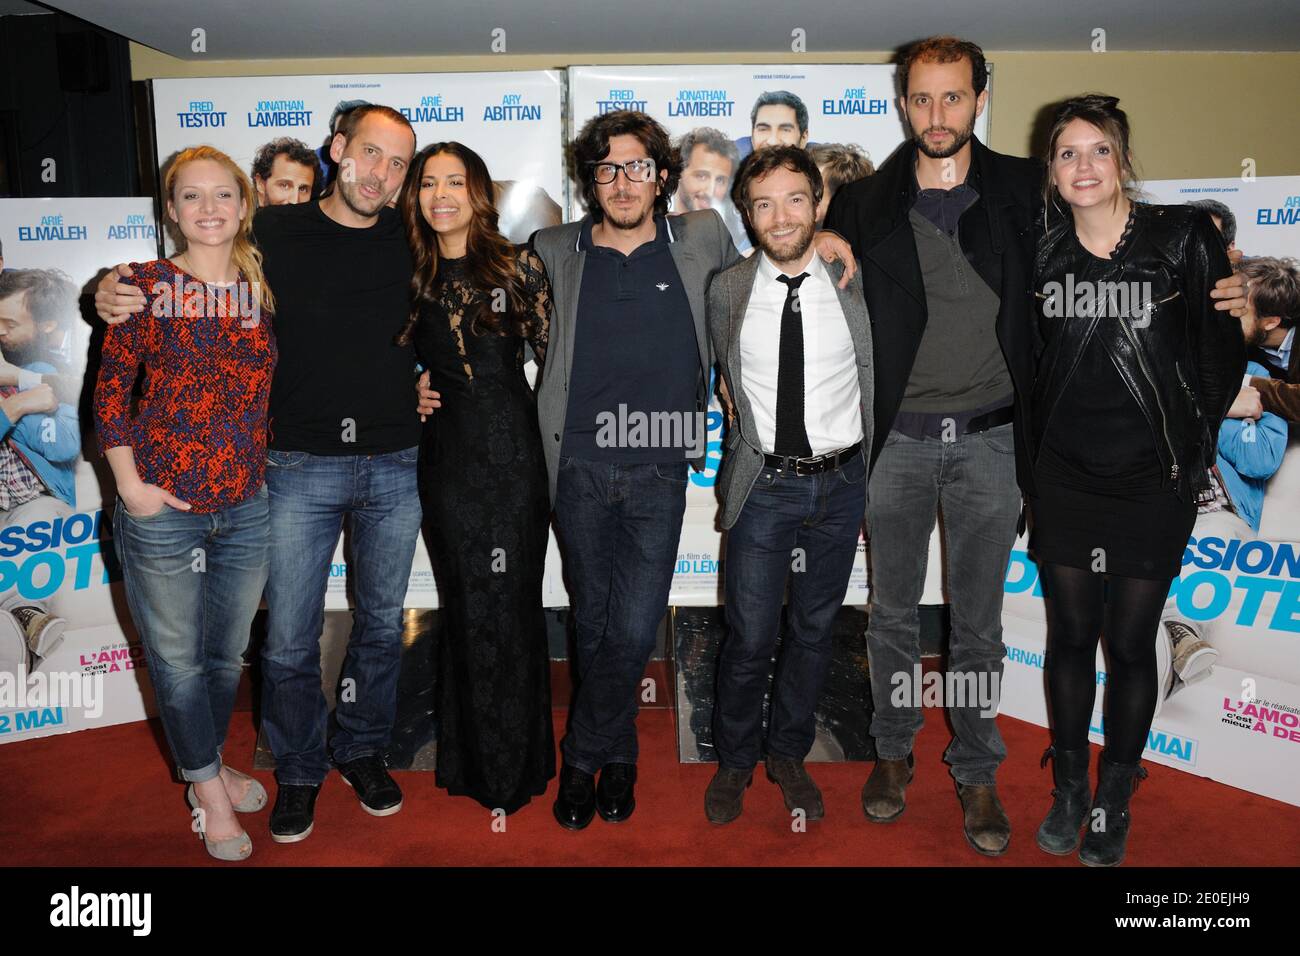 Charlie Bruneau, Fred Testot, Gyselle Soares, Laurence Arne, Arnaud Lemort, Jonathan Lambert and Arie Elmaleh attending the premiere of 'Depression et des Potes' at UGC Les Halles theater, in Paris, France on April 26, 2012. Photo by Alban Wyters/ABACAPRESS.COM Stock Photo